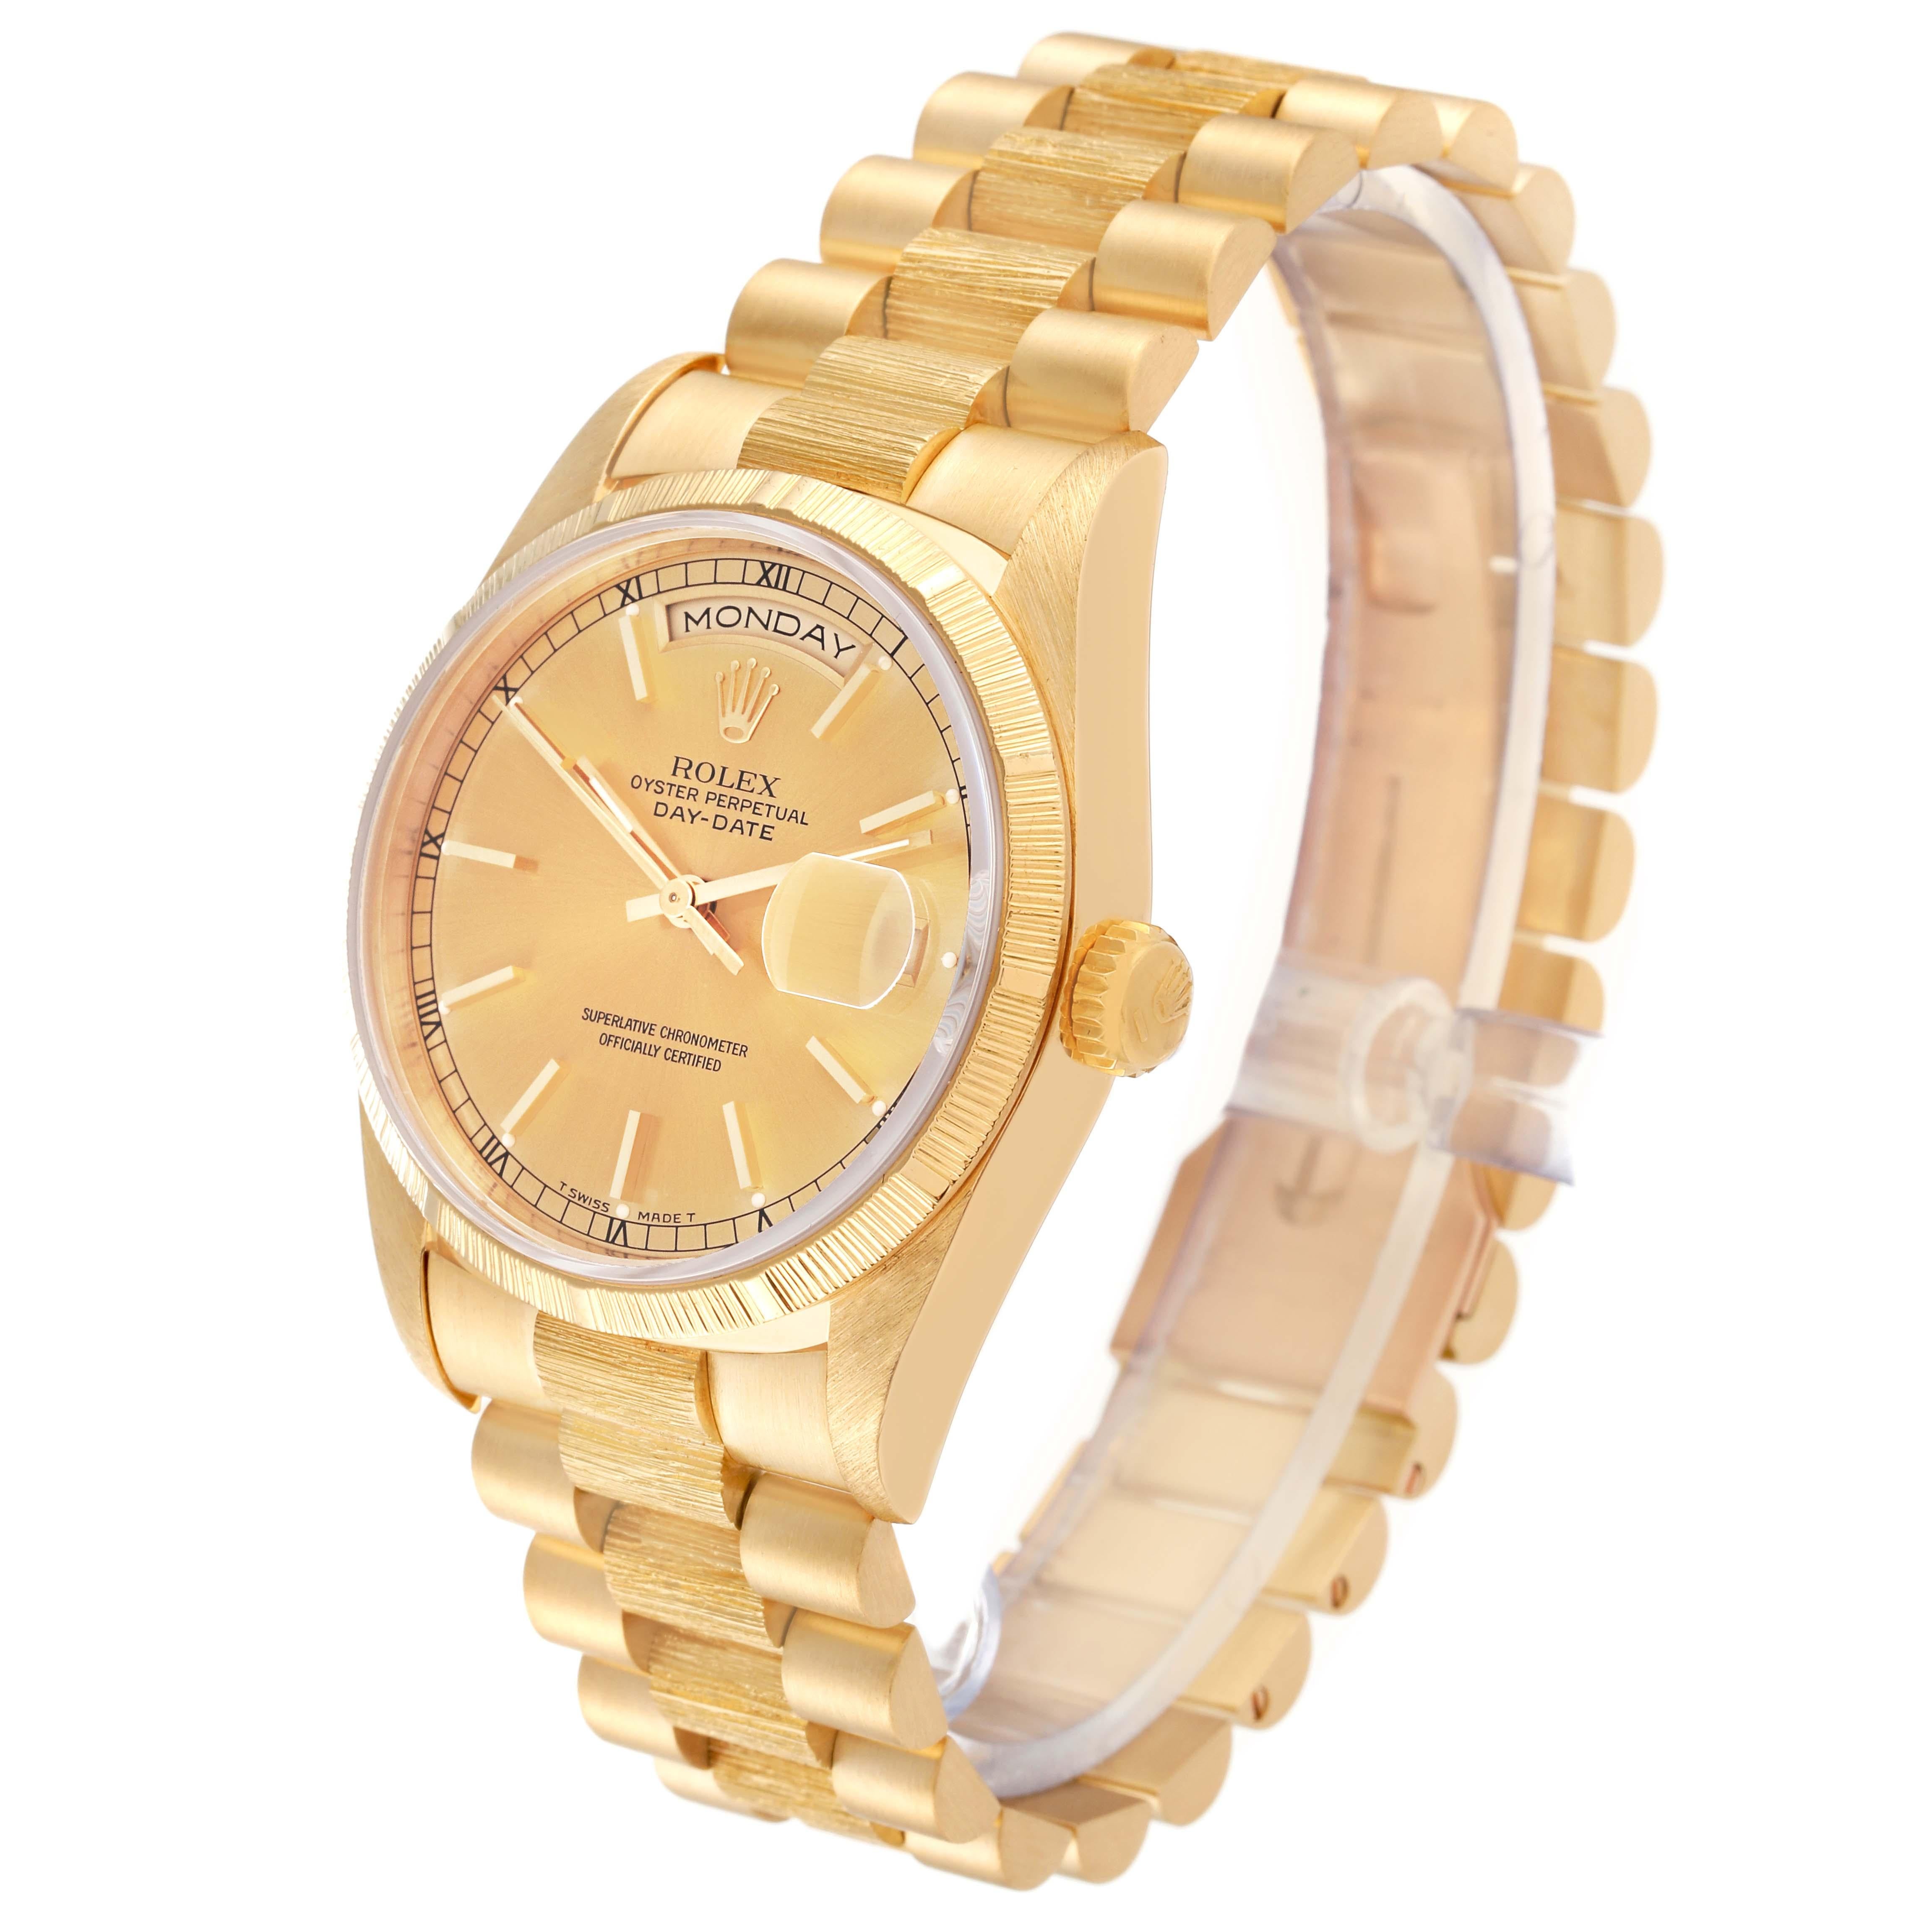 Rolex Day-Date President Yellow Gold Bark Finish Mens Watch 18248 3